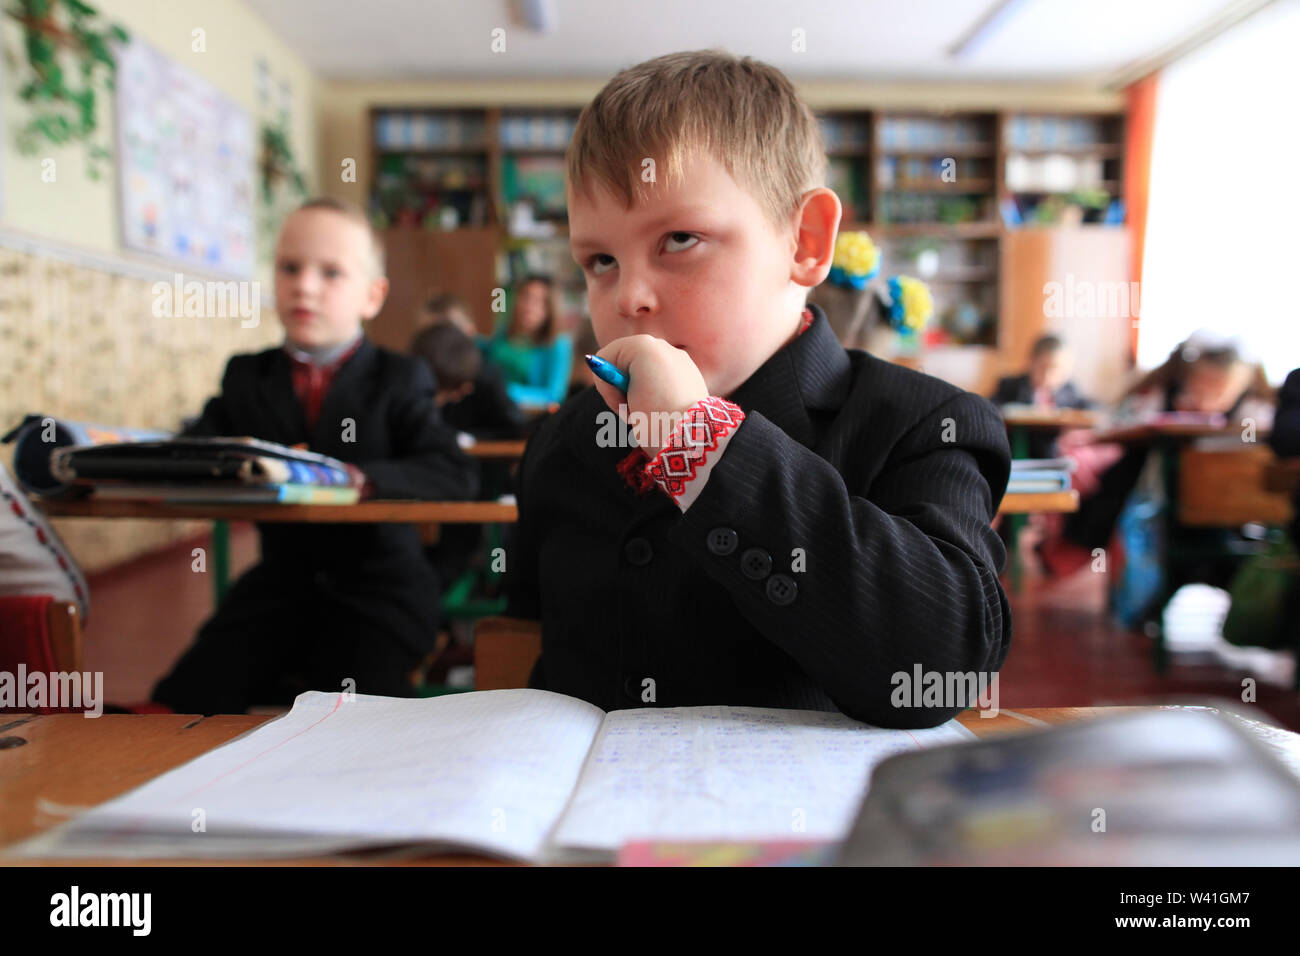 An Ukrainian schoolboy of the elementary school doing exercises during a lesson in the classroom. Radinka, Polesskiy district, Kiev Oblast, Ukraine Stock Photo